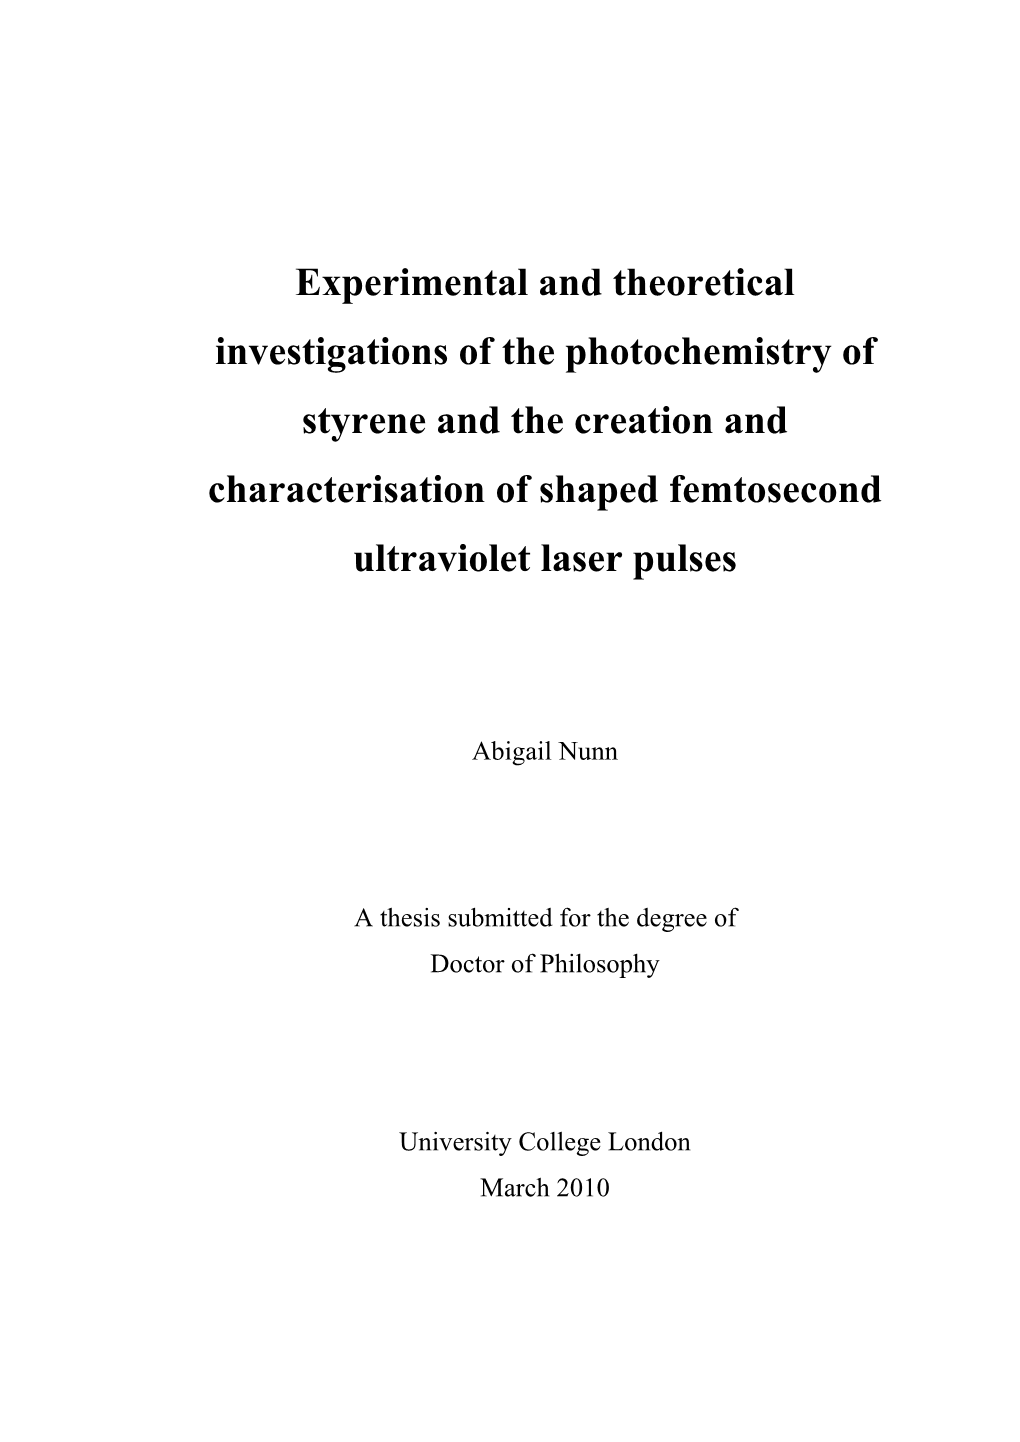 Experimental and Theoretical Investigations of the Photochemistry of Styrene and the Creation and Characterisation of Shaped Femtosecond Ultraviolet Laser Pulses